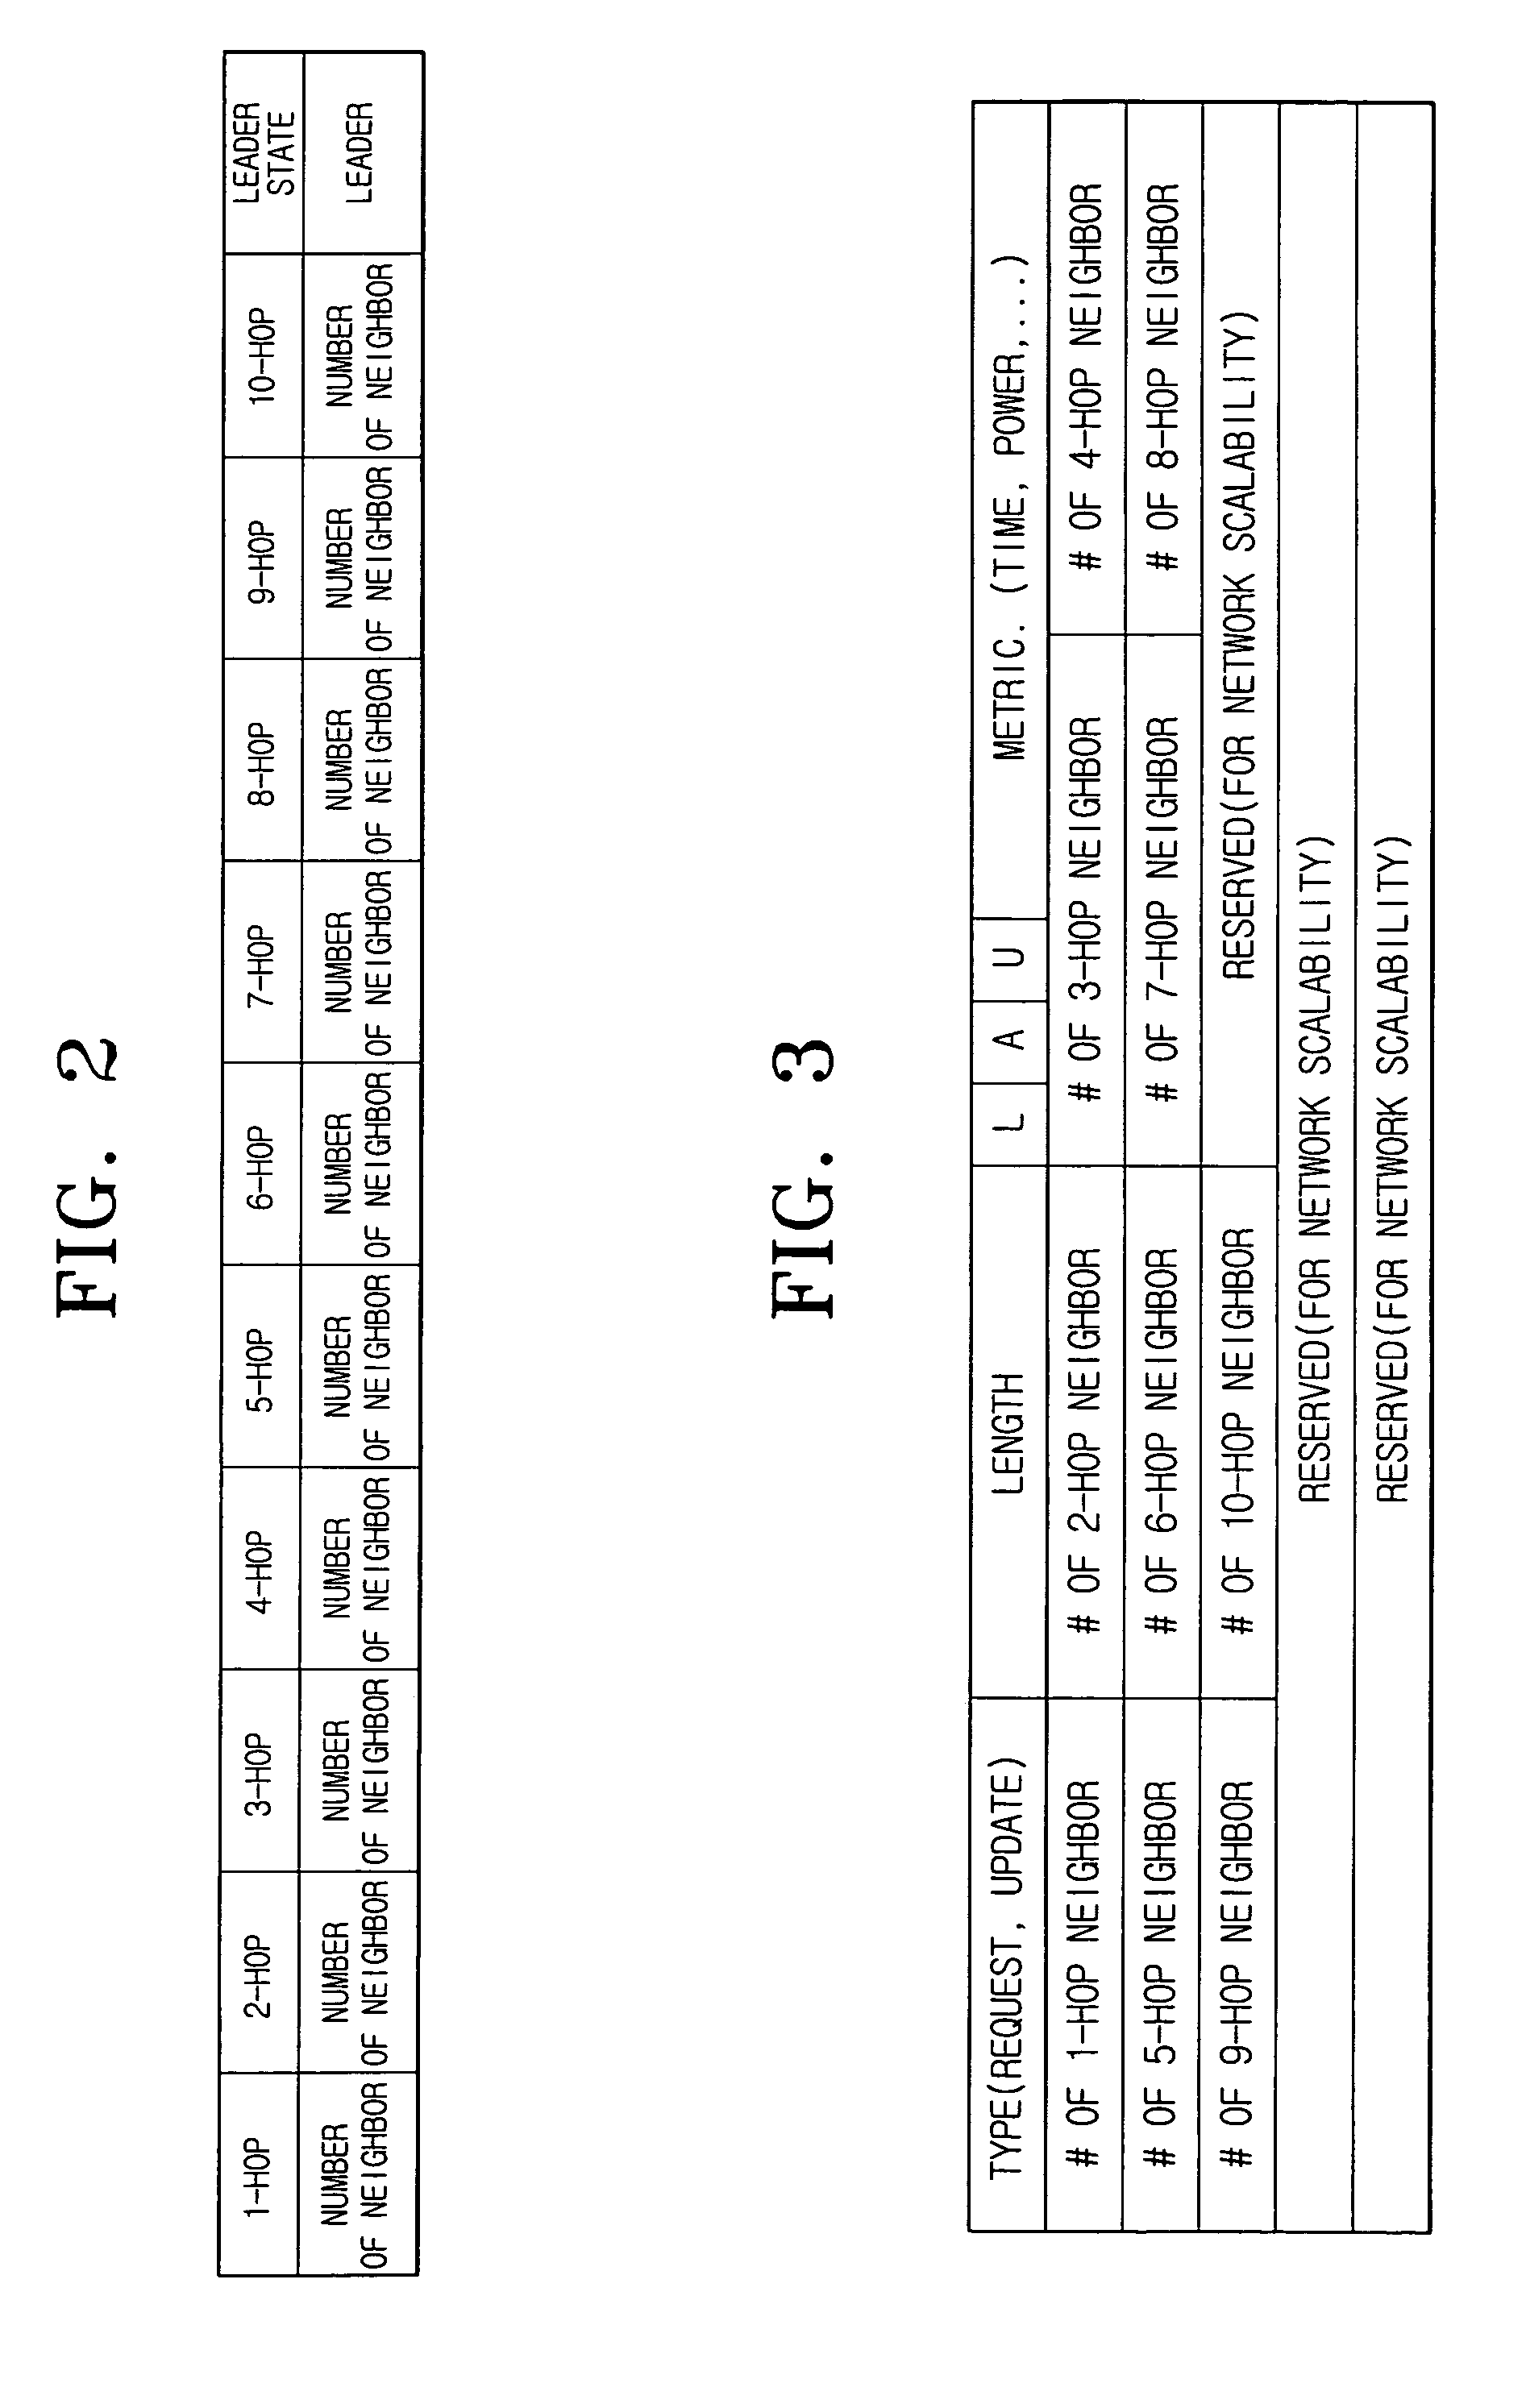 Method of electing a leader in an ad-hoc network